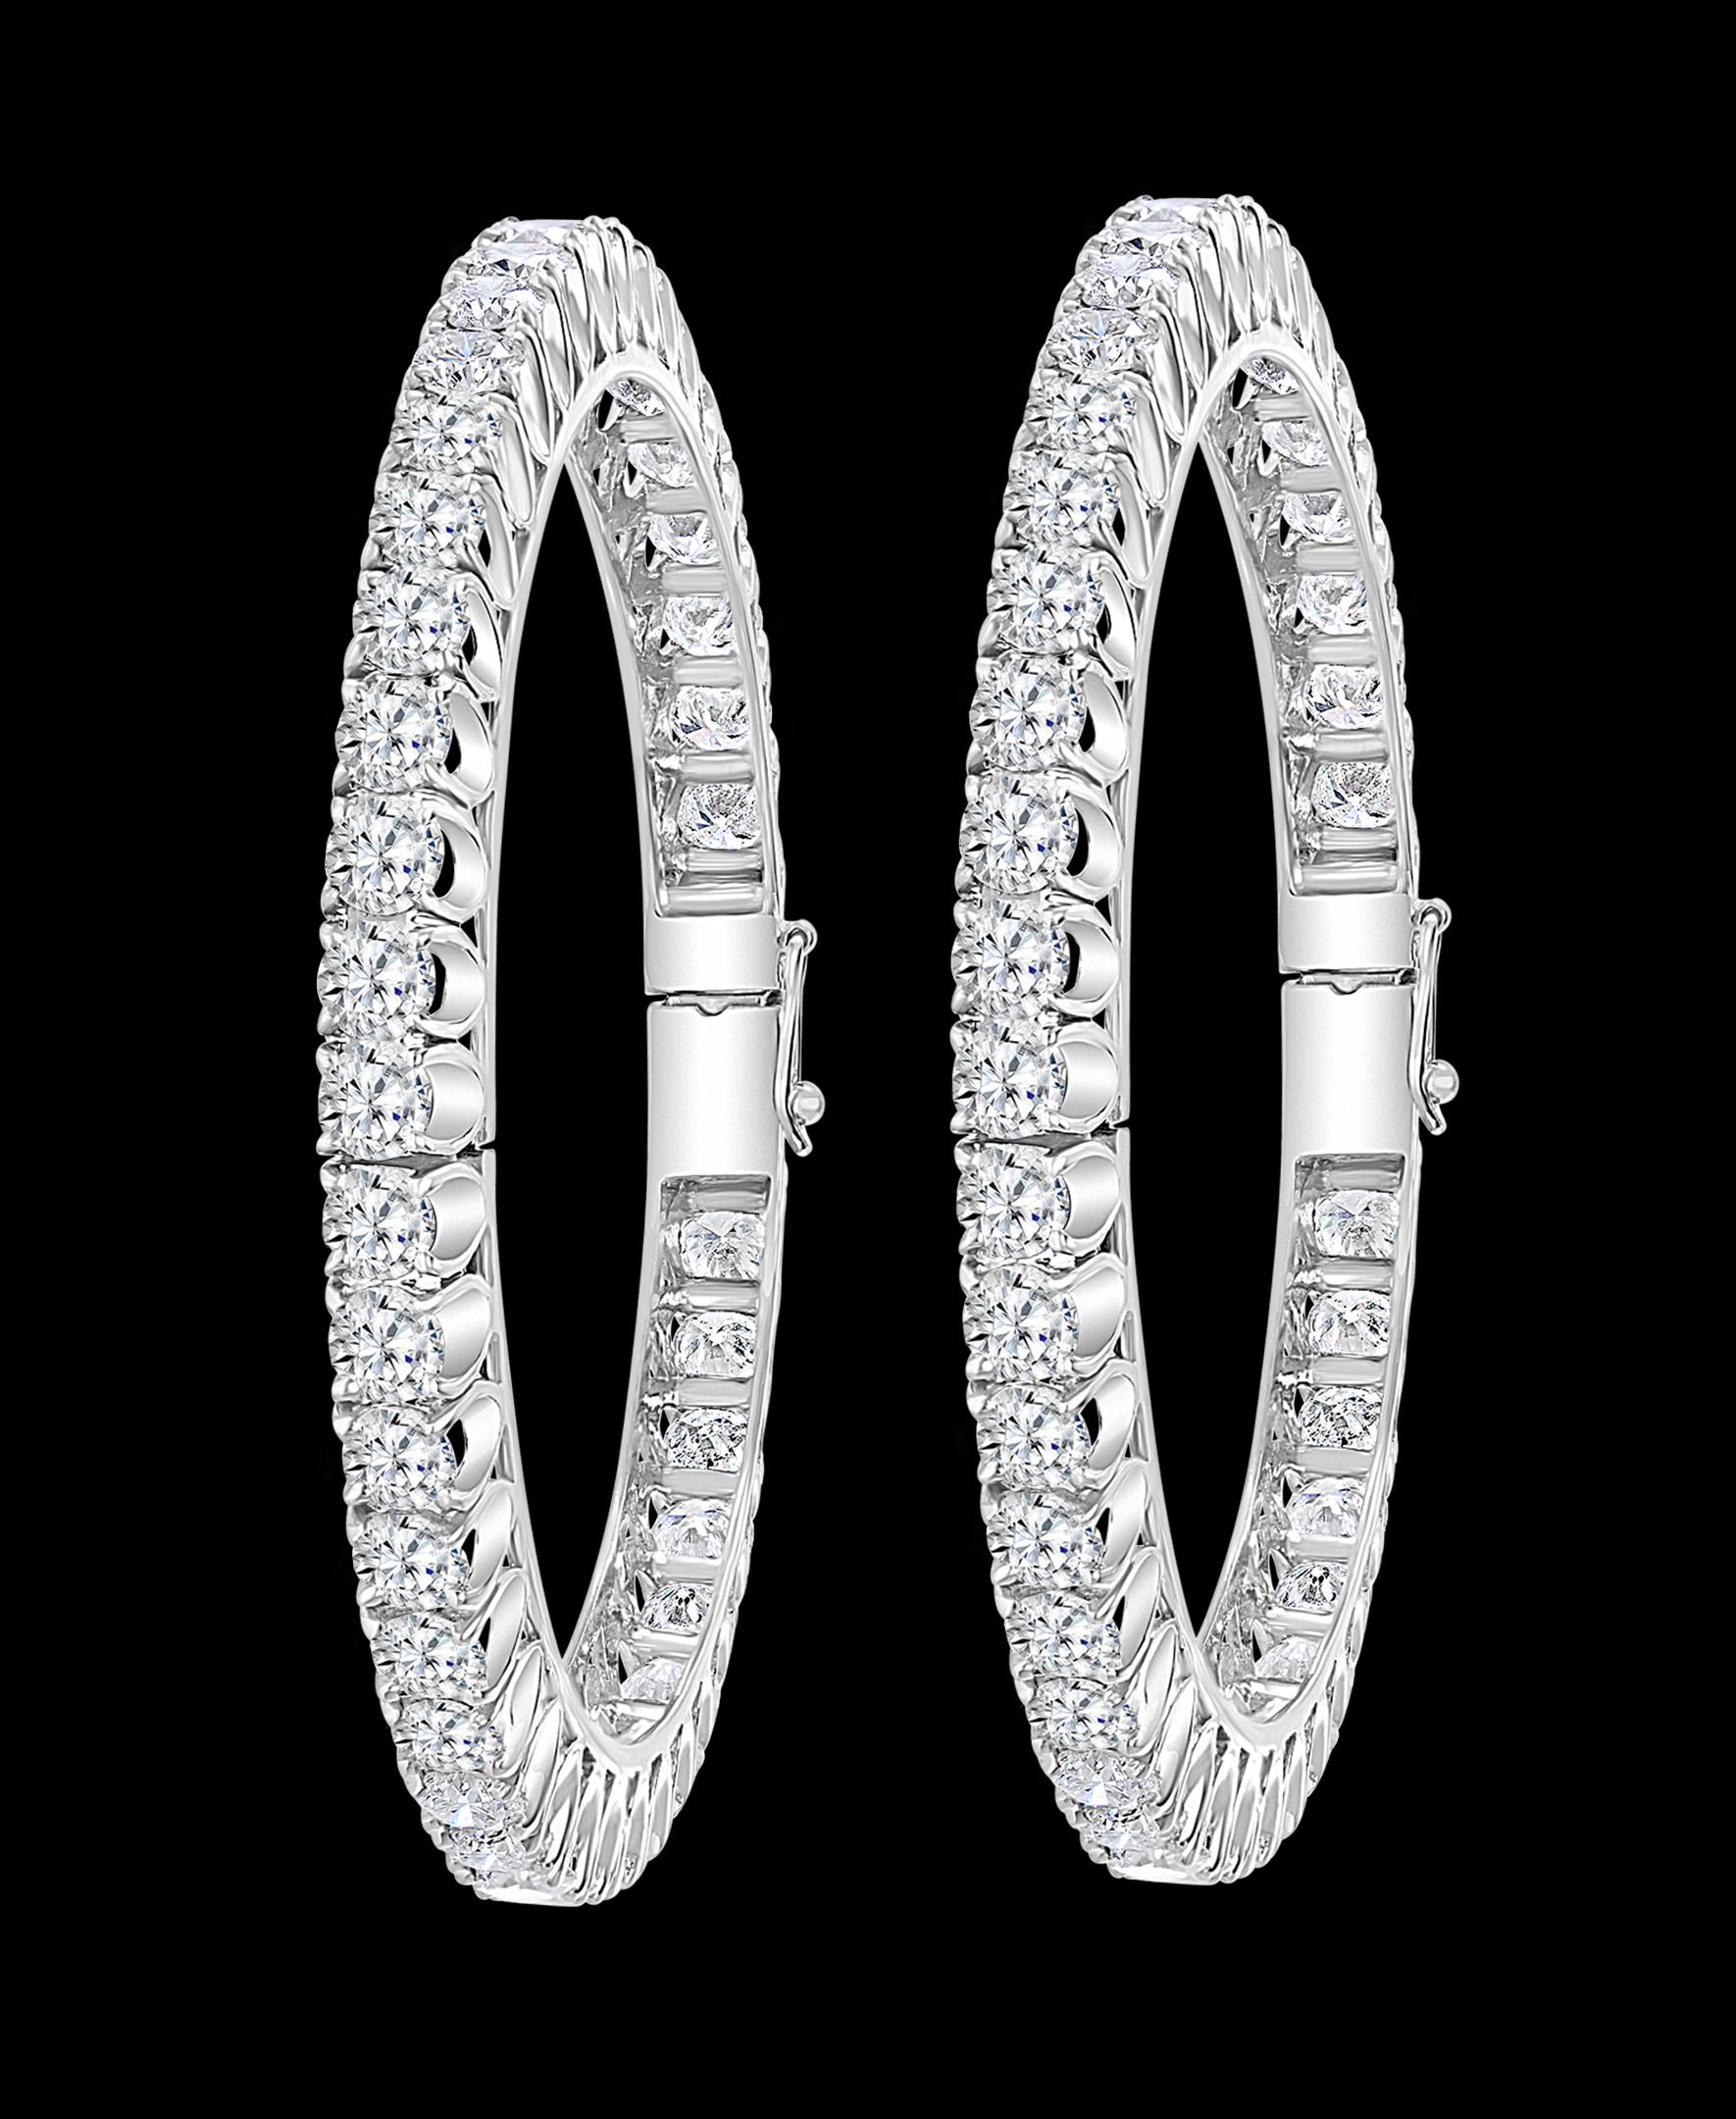 Single line 40 pointer  each , 35.62 Ct Contemporary  18 Karat  White  Gold & Diamond  Eternity Bangle Bracelet 
It features Two  bangles  crafted from  18k White gold   embedded with  35.62  Carats of  Round brilliant diamonds in two bangles . 
The